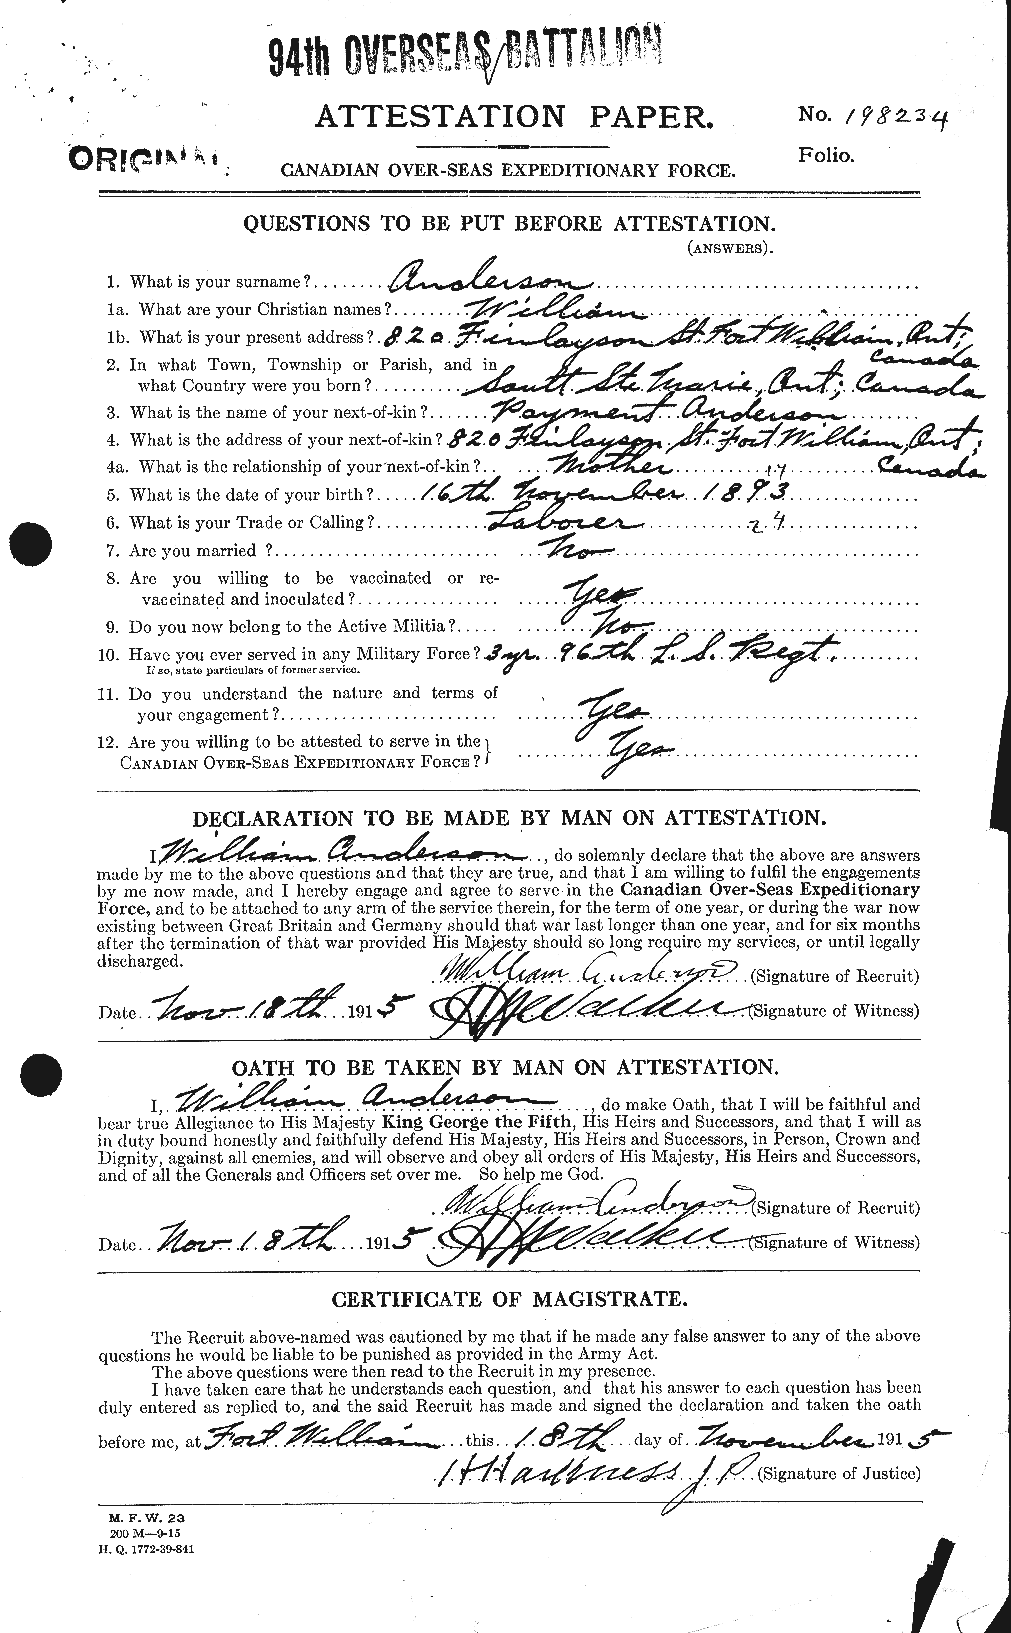 Personnel Records of the First World War - CEF 210761a